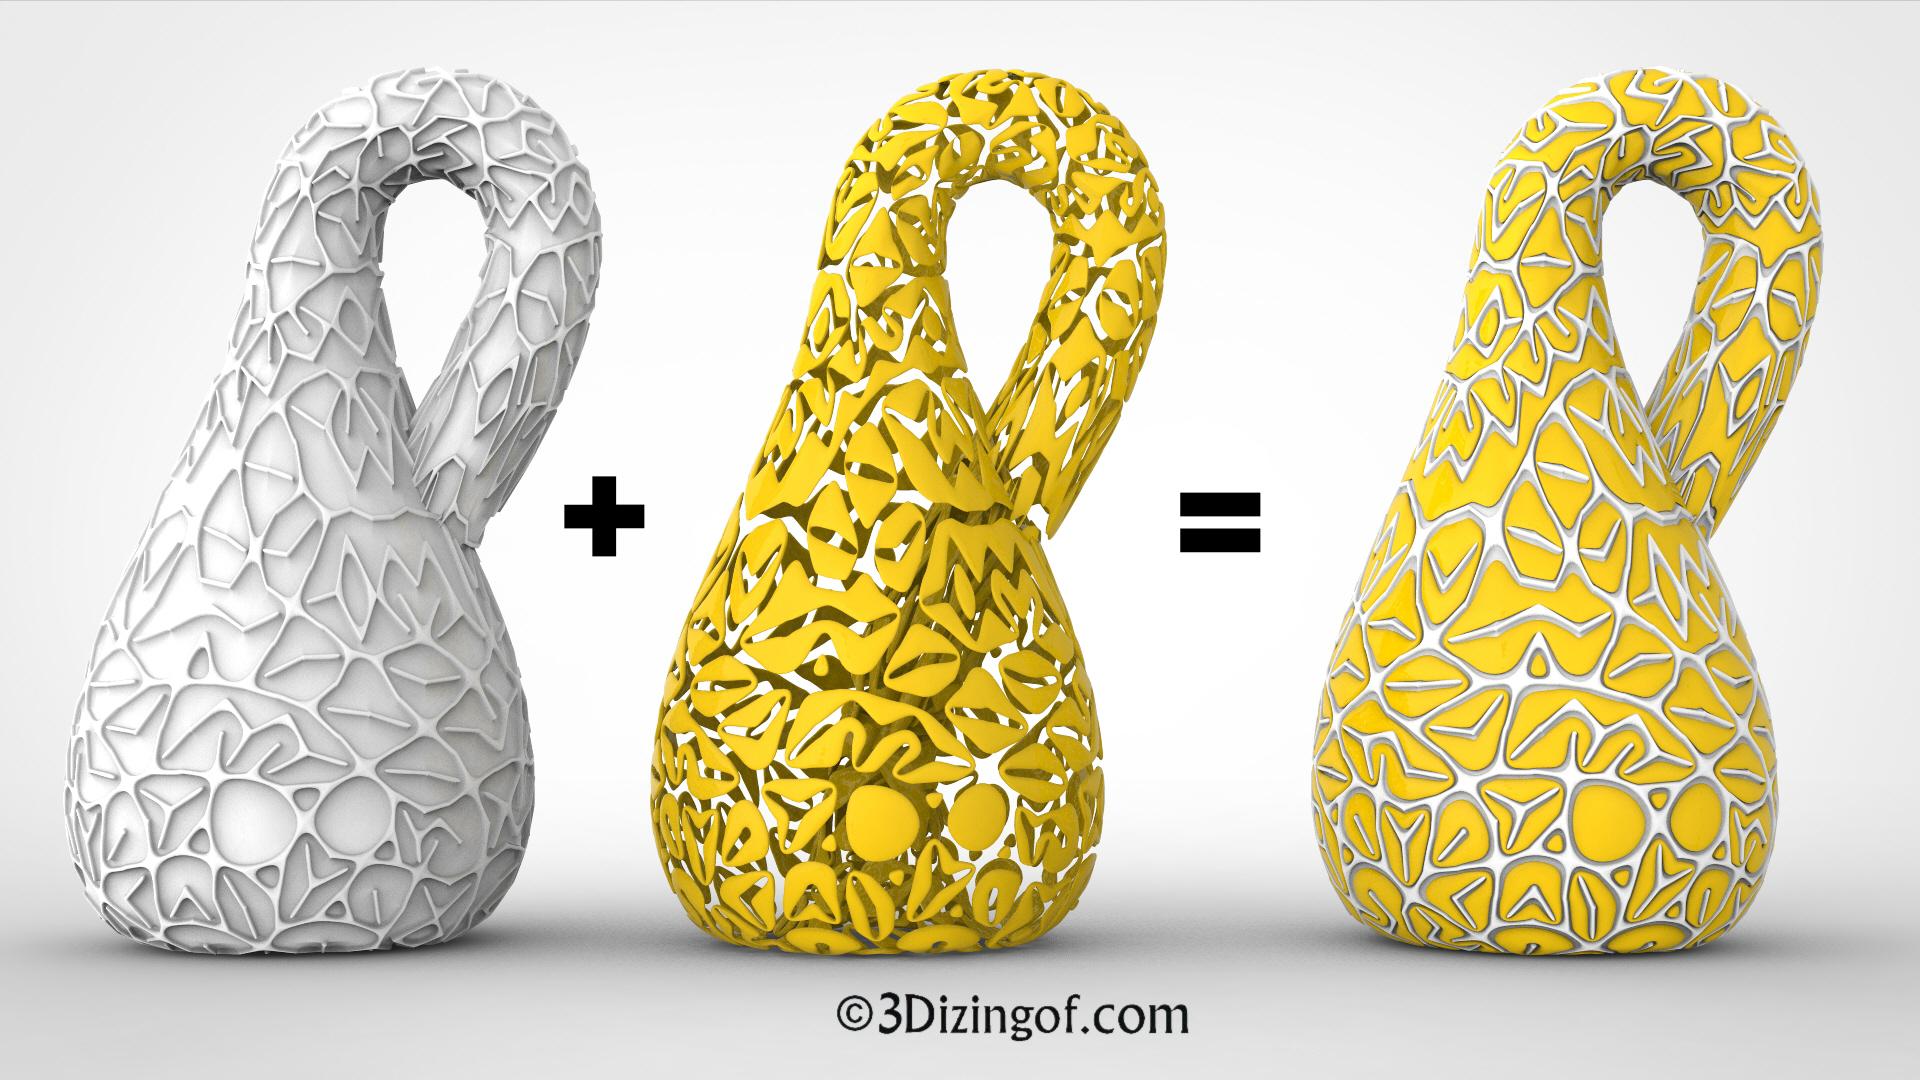 Dizingof's Random Pattern and Klein Bottle Highlight 3D Printing's Creative Explosion - | The Voice of 3D Printing / Additive Manufacturing